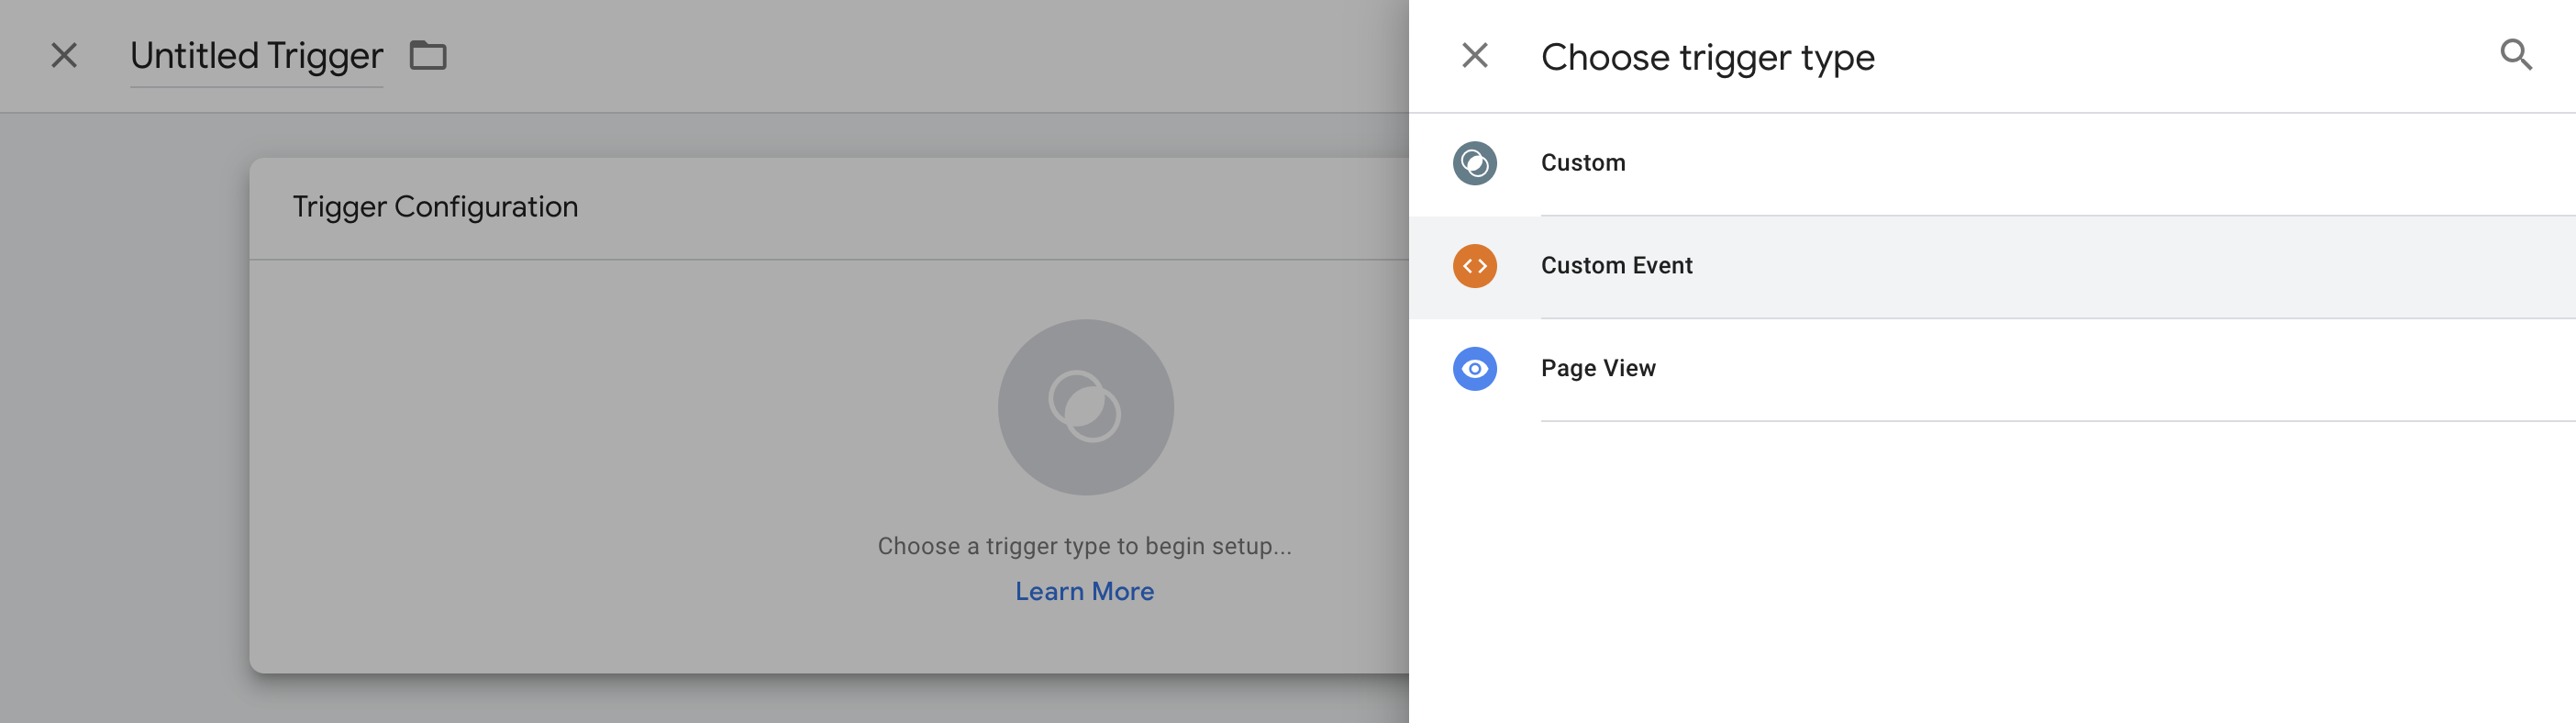 Choose trigger type dialog with Custom Event trigger highlighted